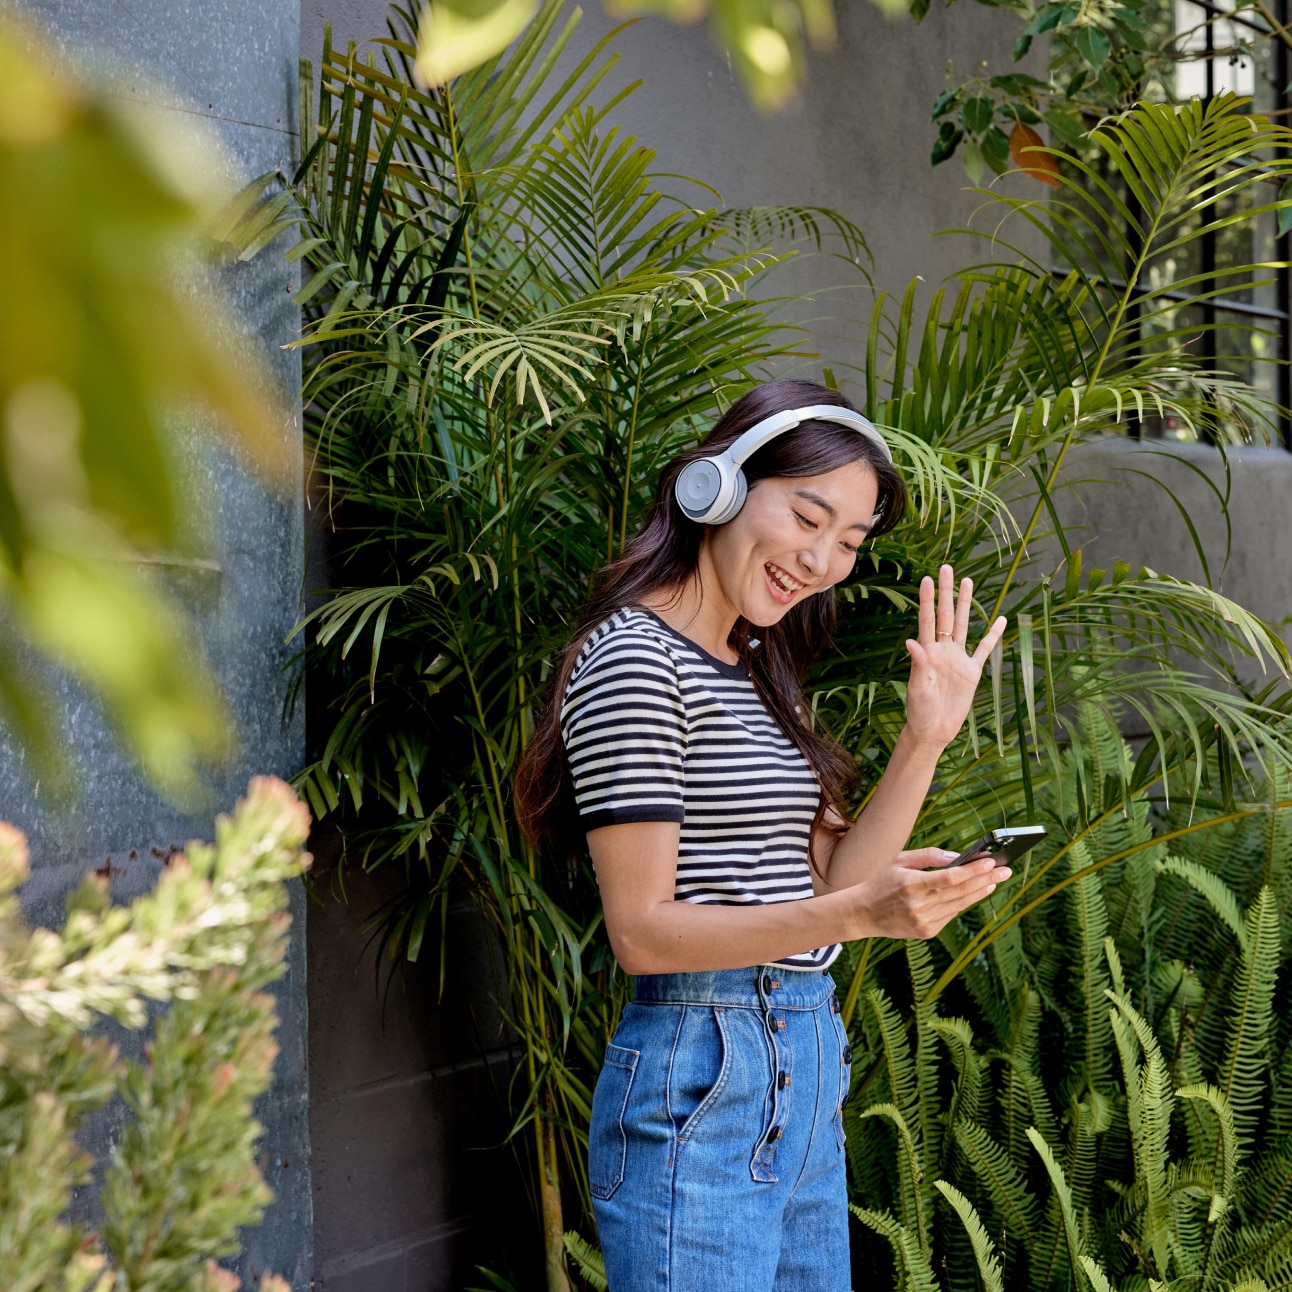 Standing in front of a gray building by green foliage, a person in a headset collaborates on a mobile phone via Webex Calling.